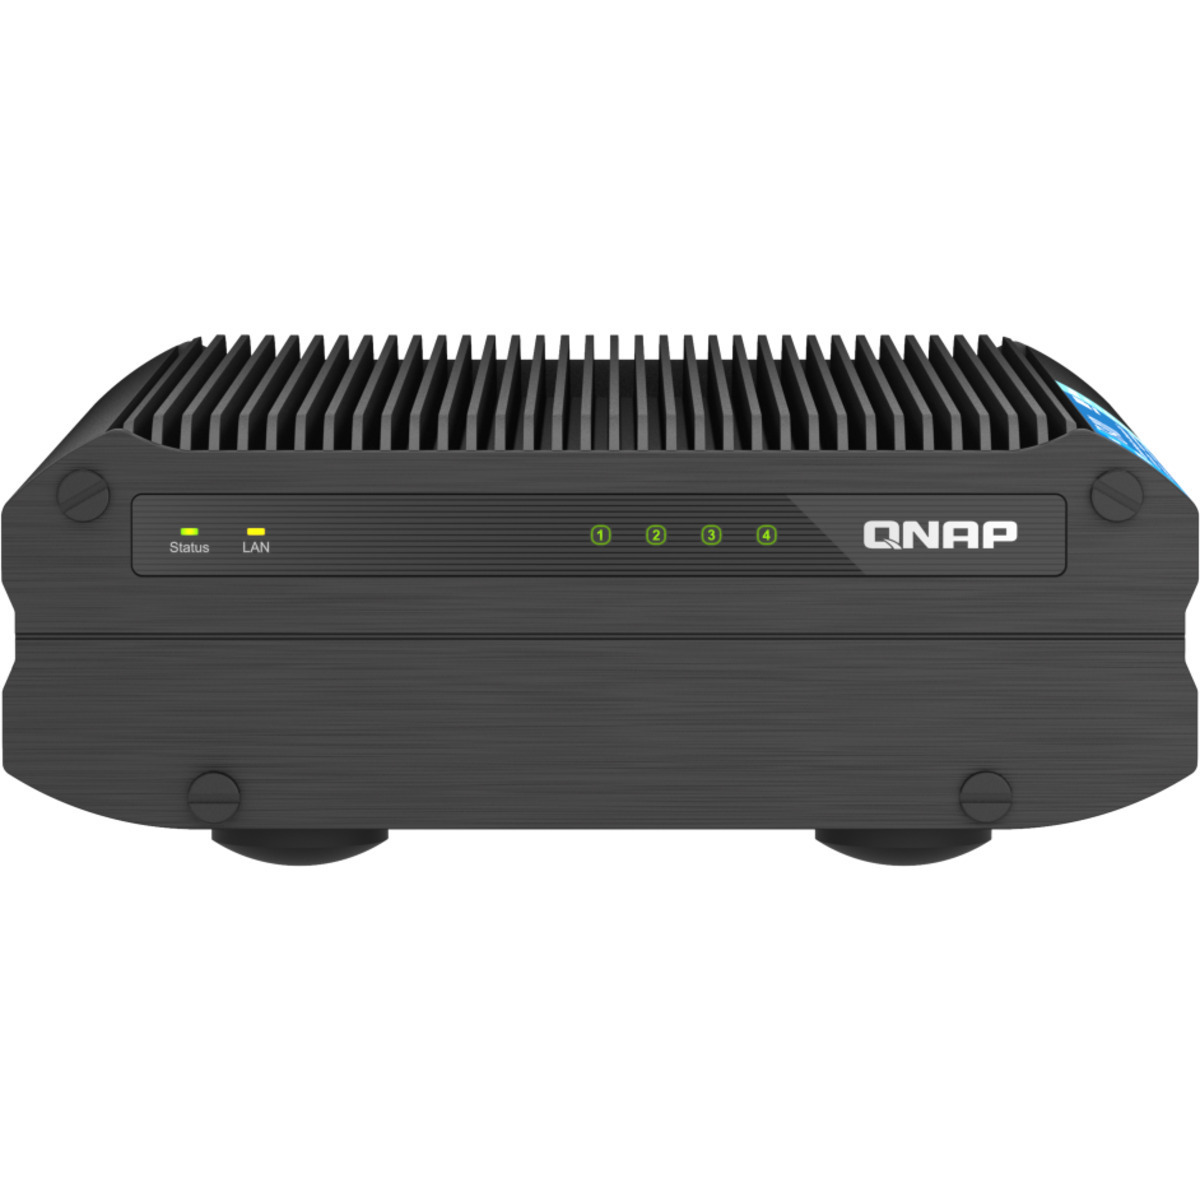 QNAP TS-i410X 12tb 4-Bay Desktop Multimedia / Power User / Business NAS - Network Attached Storage Device 3x4tb Samsung 870 EVO MZ-77E4T0BAM 2.5 560/530MB/s SATA 6Gb/s SSD CONSUMER Class Drives Installed - Burn-In Tested - ON SALE TS-i410X